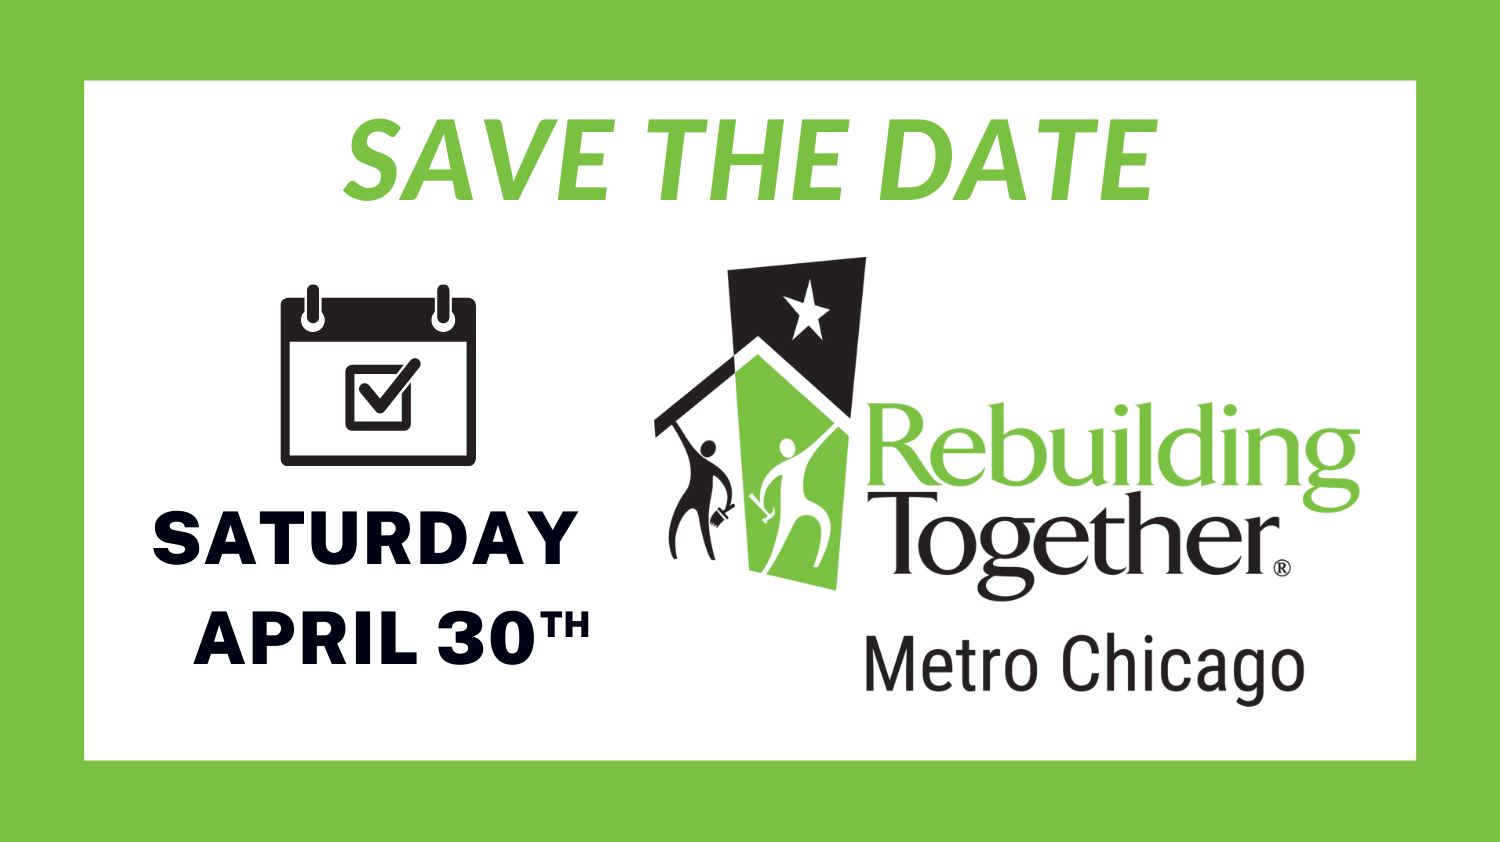 Save The Date - Rebuilding Together® Metro Chicago